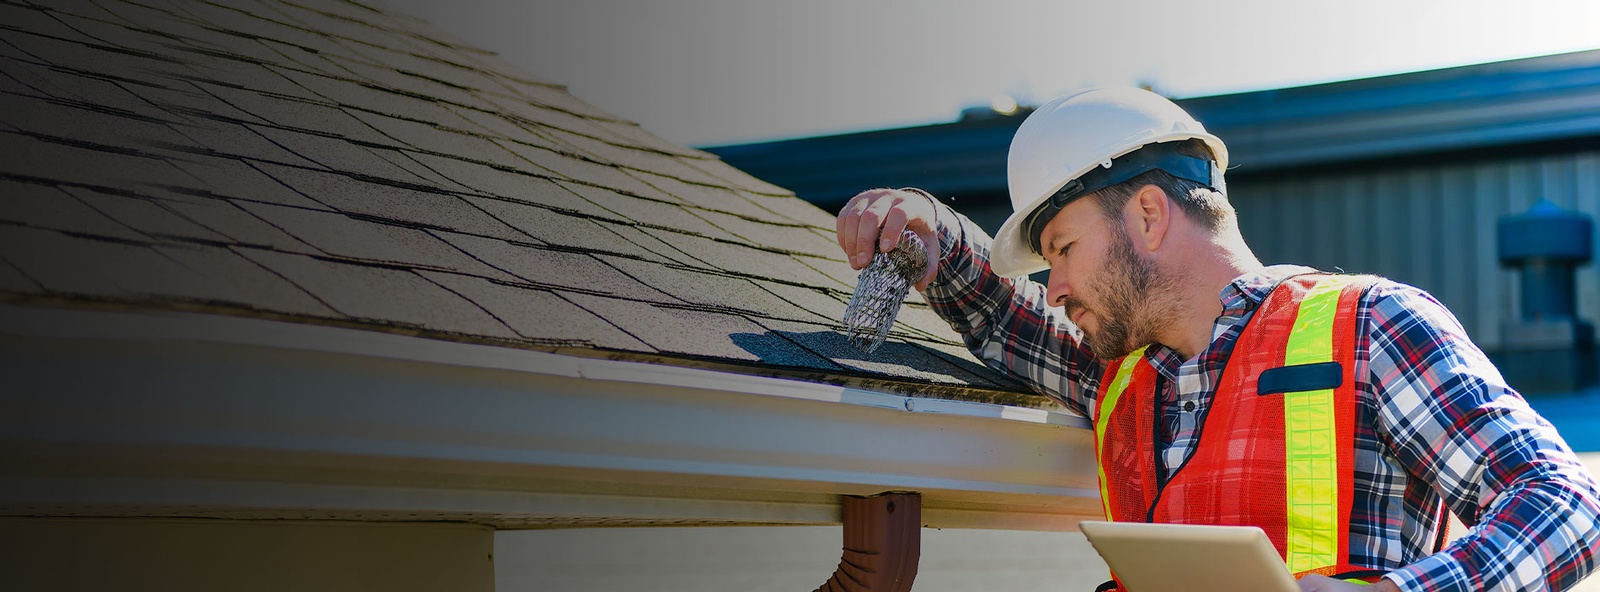 Our Roof Inspectors provide comprehensive home roof and chimney inspection services from start to finish in Edmonton.